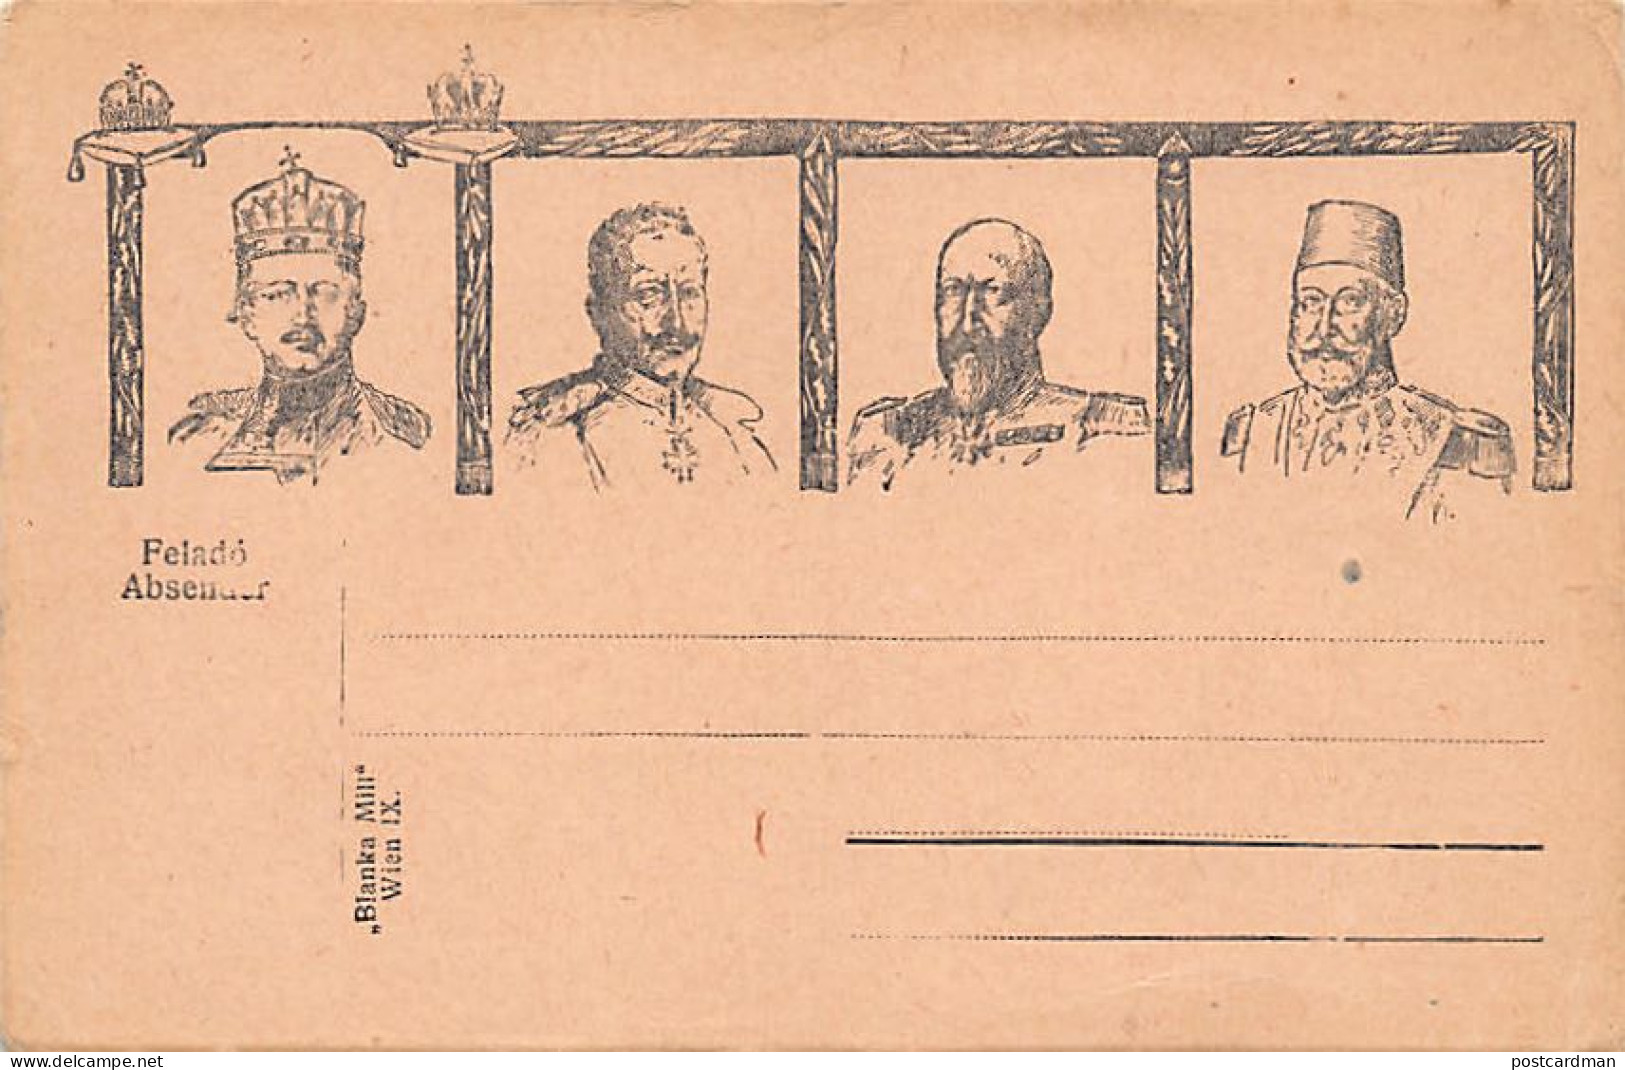 Turkey - Portraits Of The Central Powers Heads Of State - Sultan Mehmed V - Publ. Unknown  - Turquie